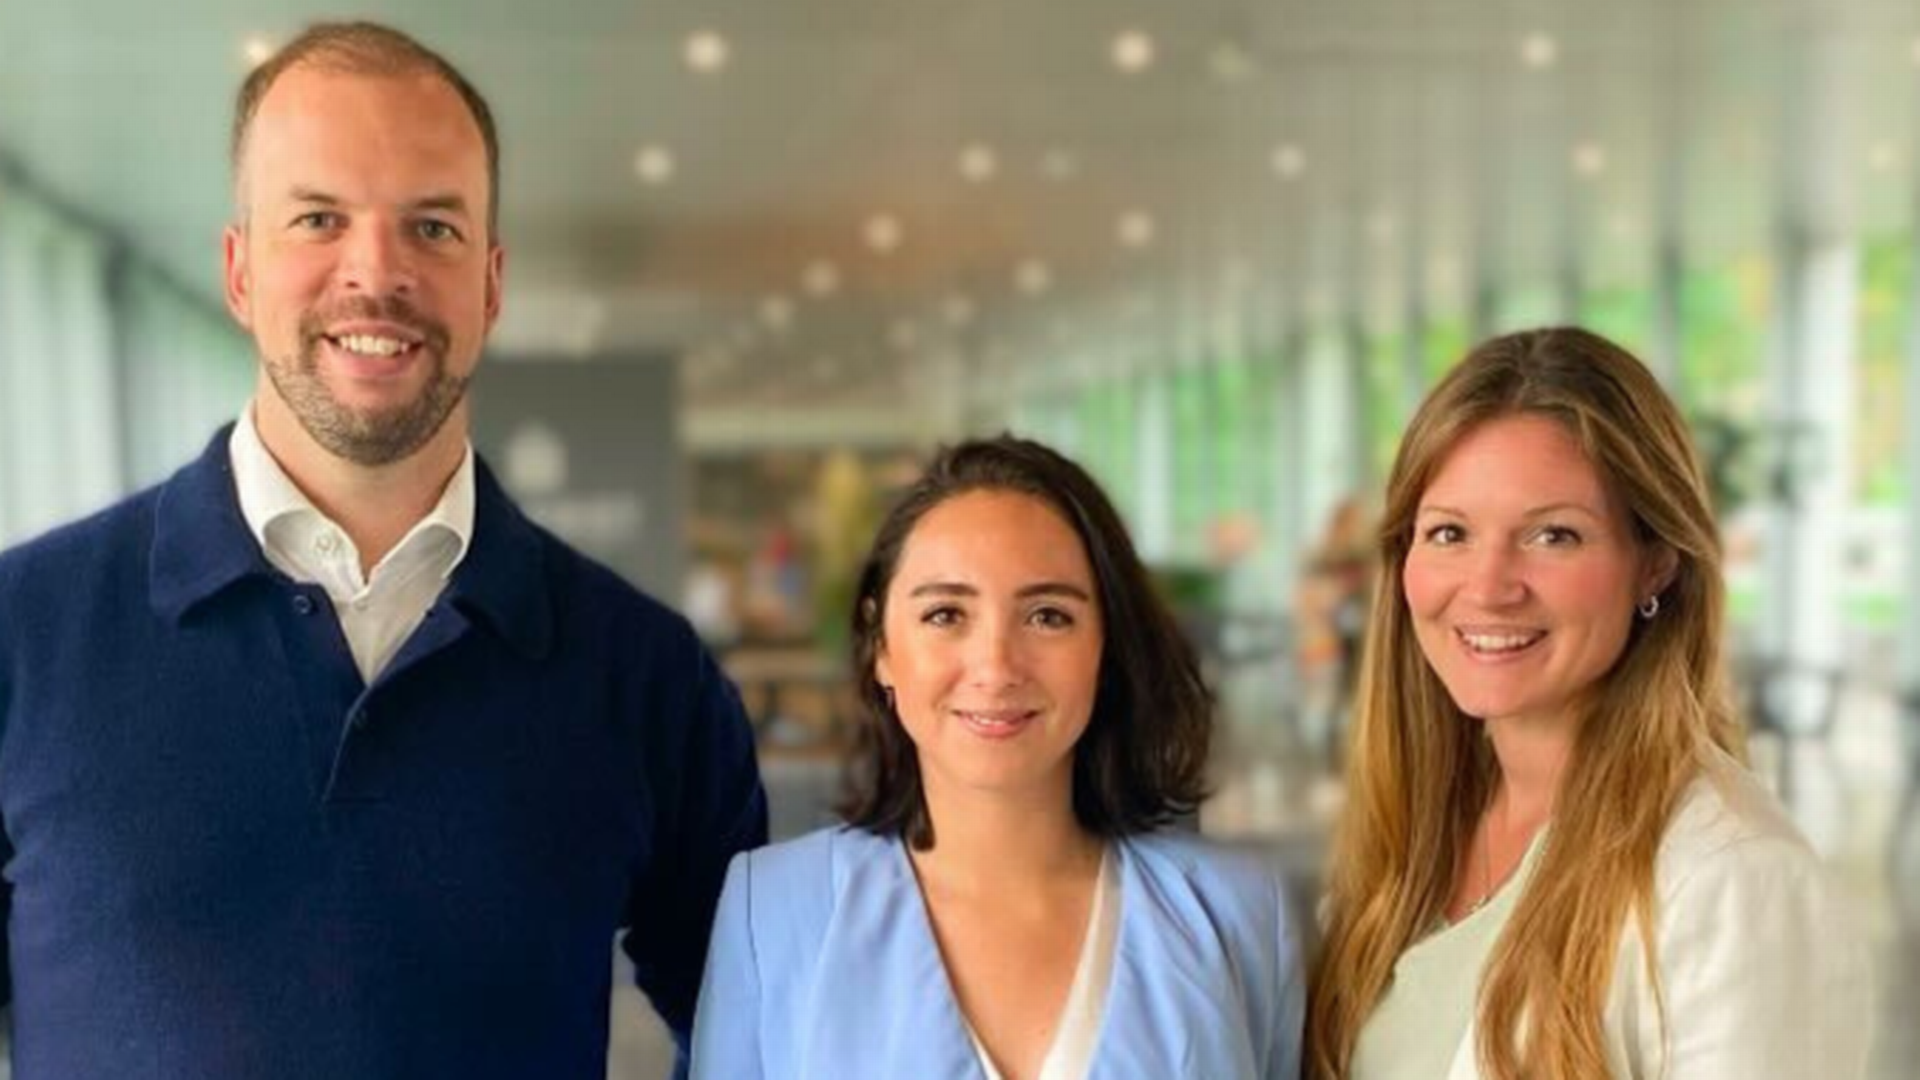 Maersk Growth's new management team consists of CEO Jonas Linnebjerg, as well as Alexa Ríos, who will be responsible for strategic business innovation, Ida Christine Brun, who will be head of ecosystem management. | Photo: Maersk Growth